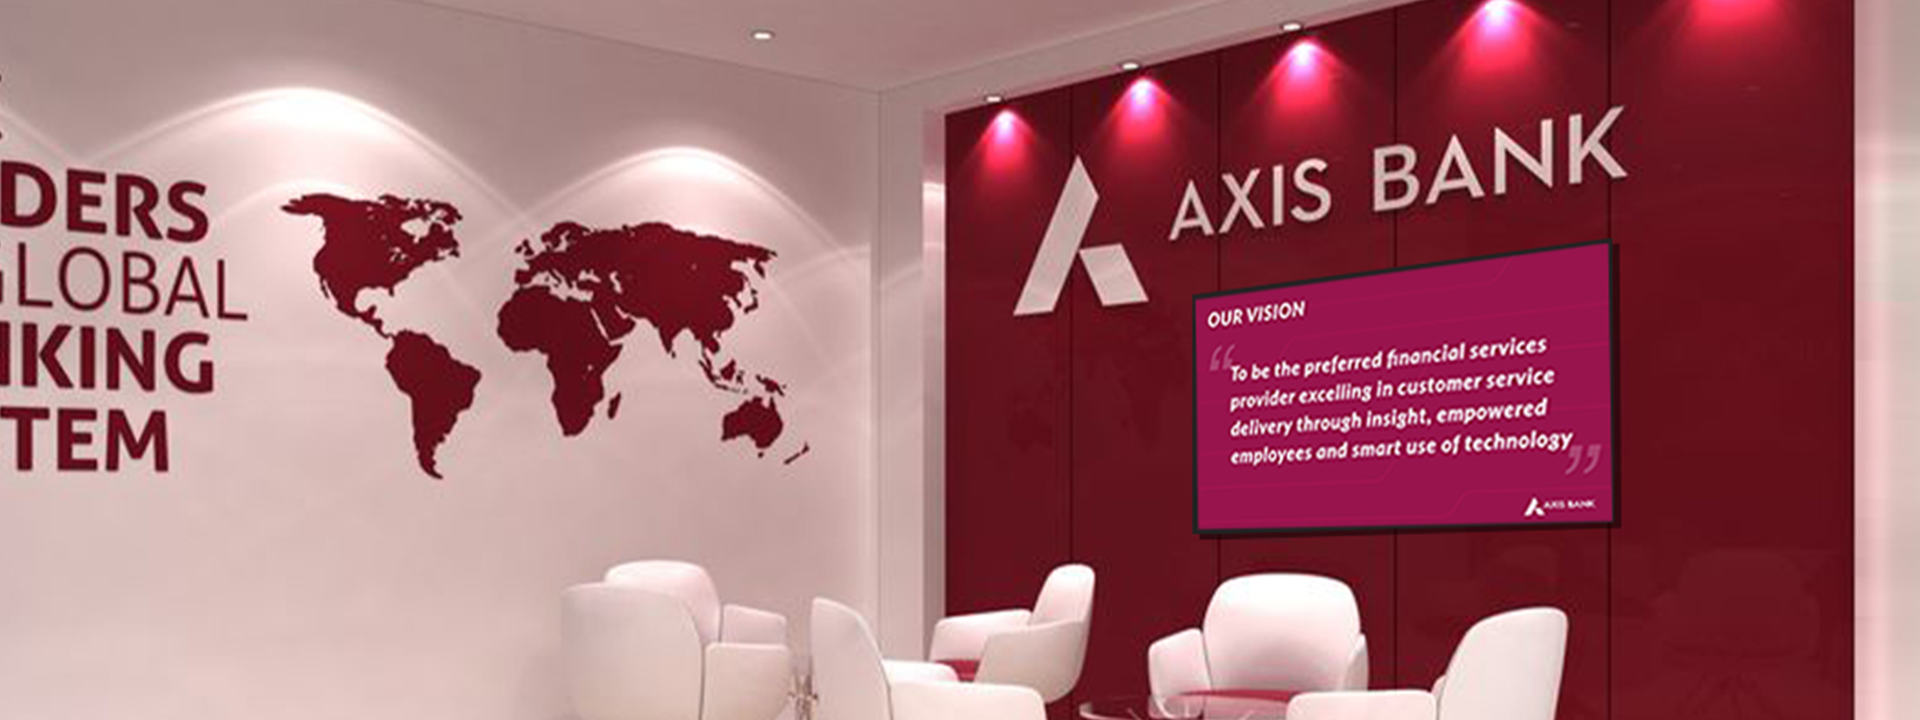 Digital Signage for Axis Bank